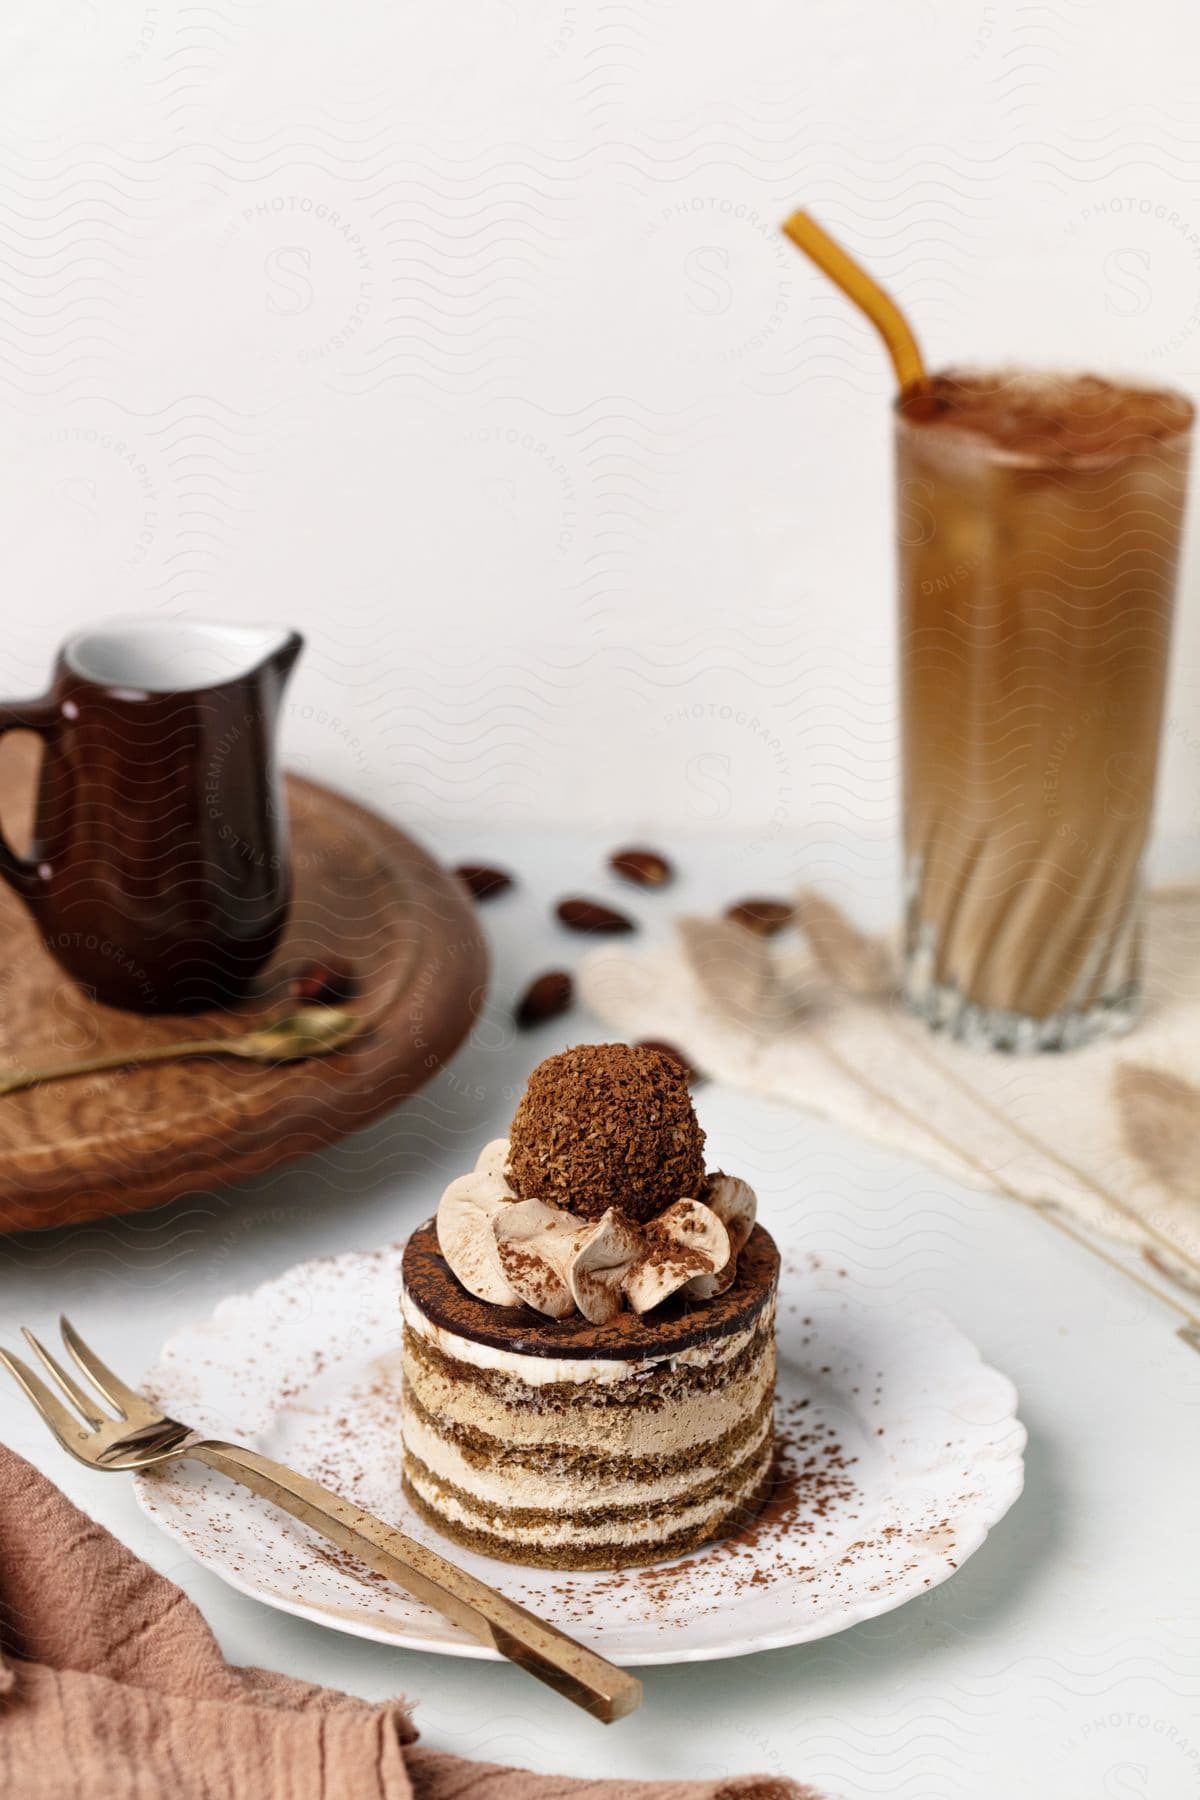 Stock photo of a slice of tiramisu cake sits on a white plate next to a glass of iced coffee.